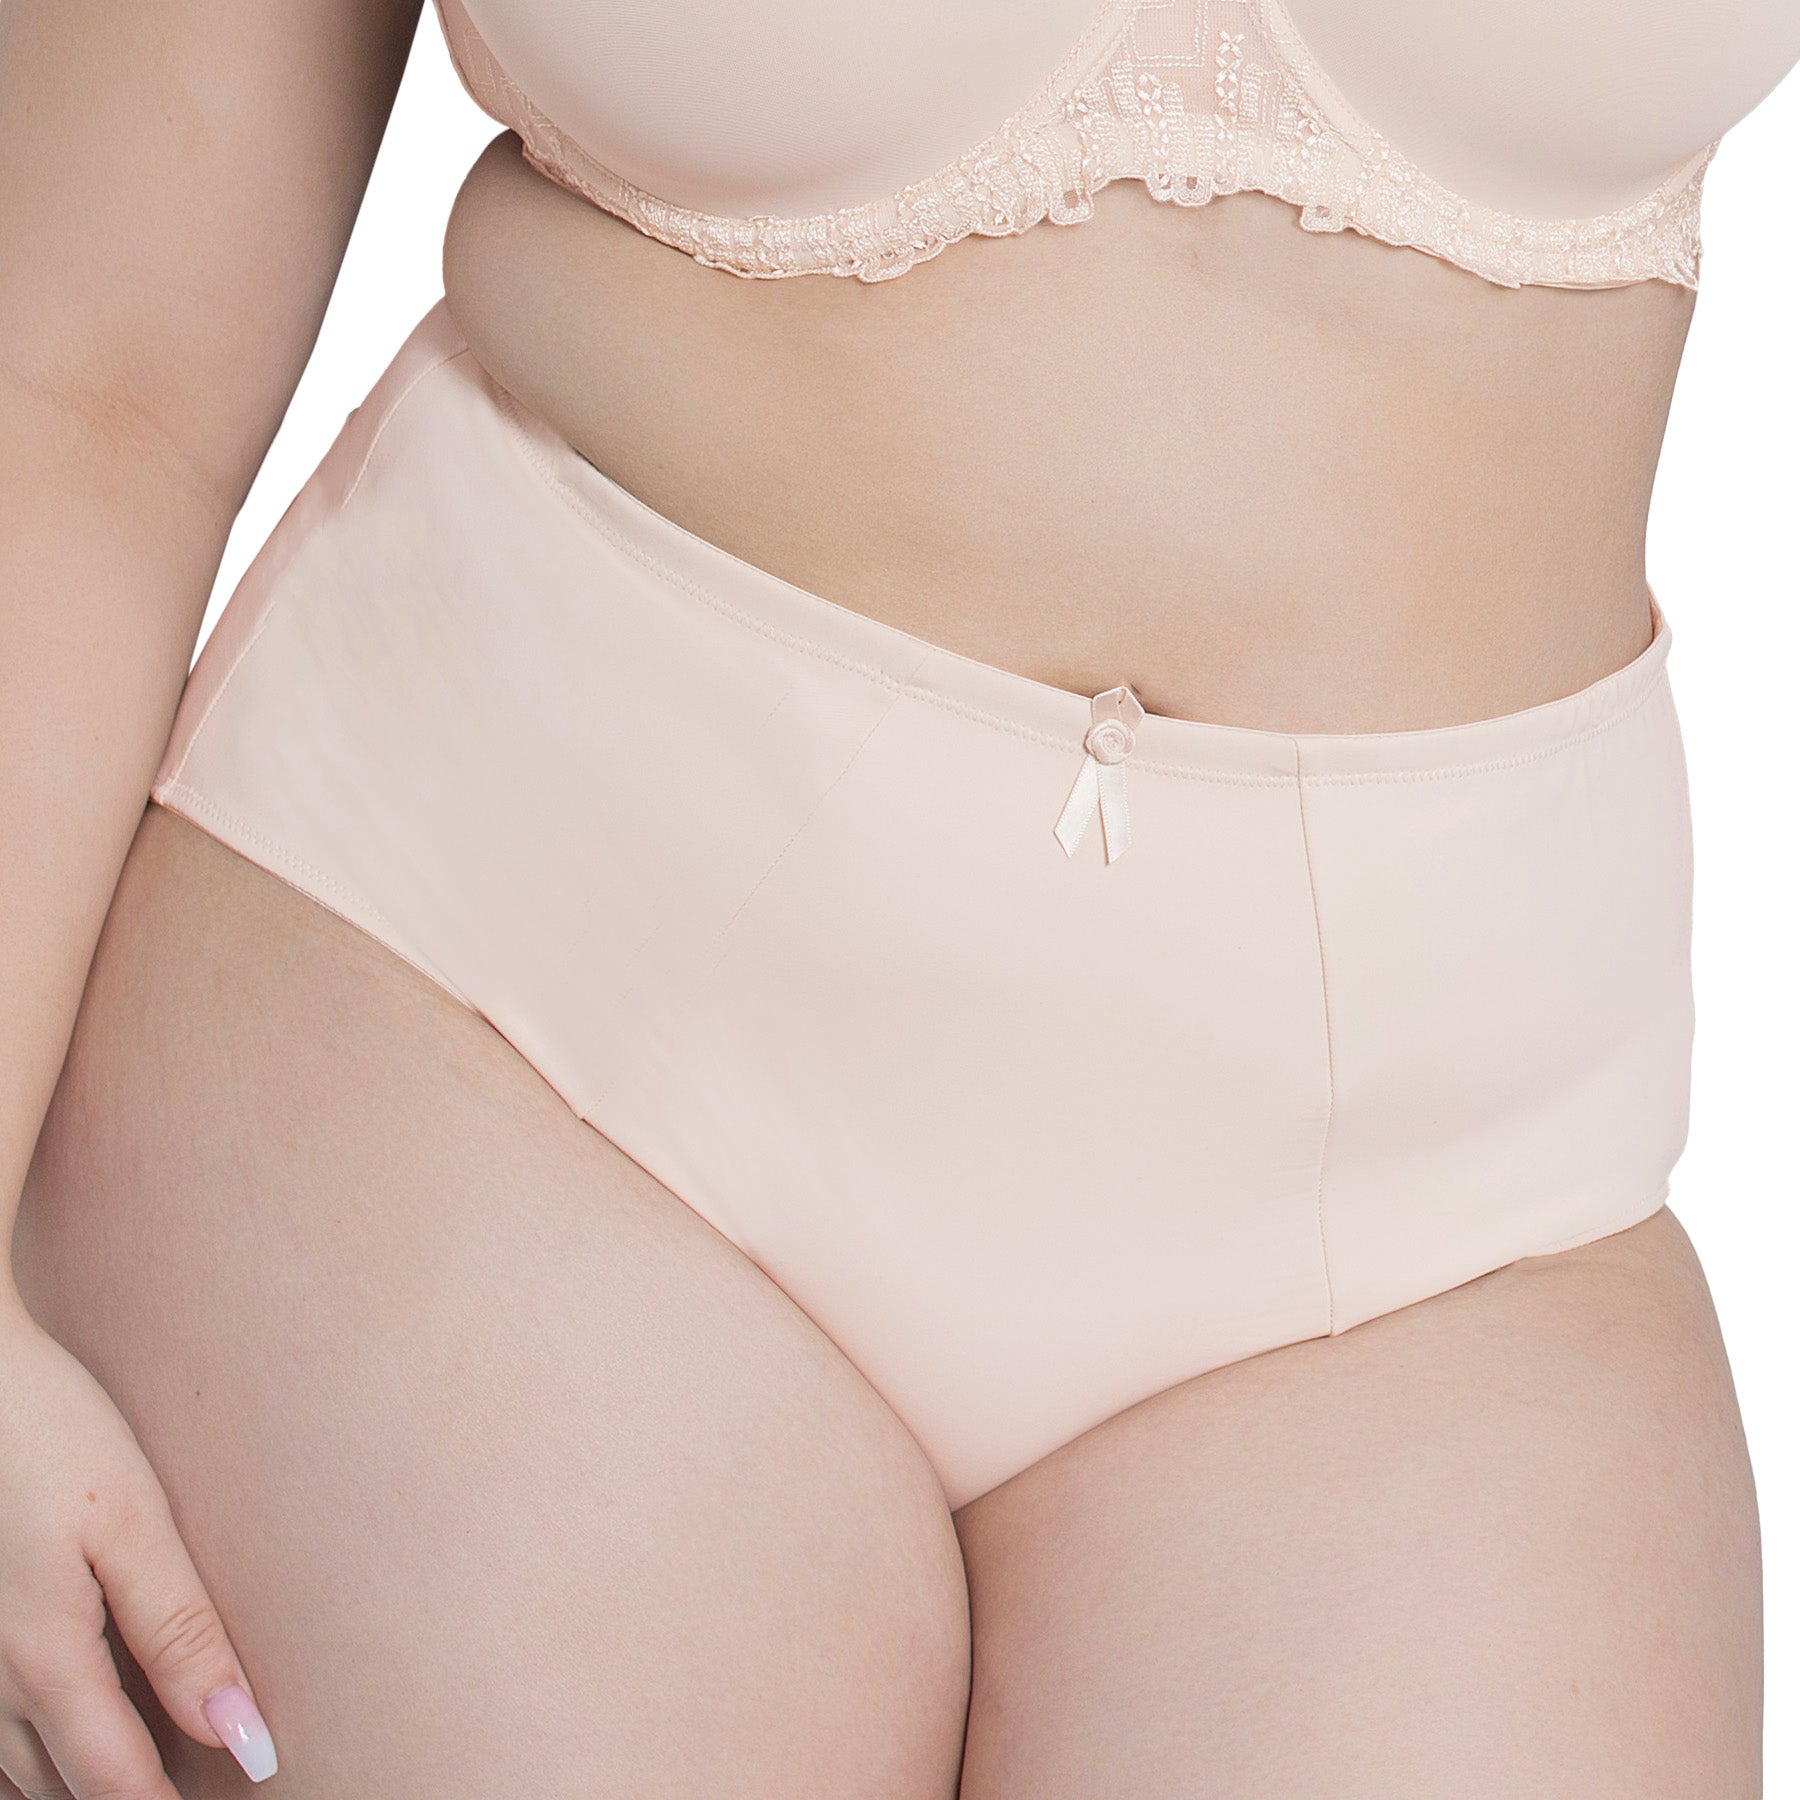 Fit Fully Yours Elise Brief U1813 Blush